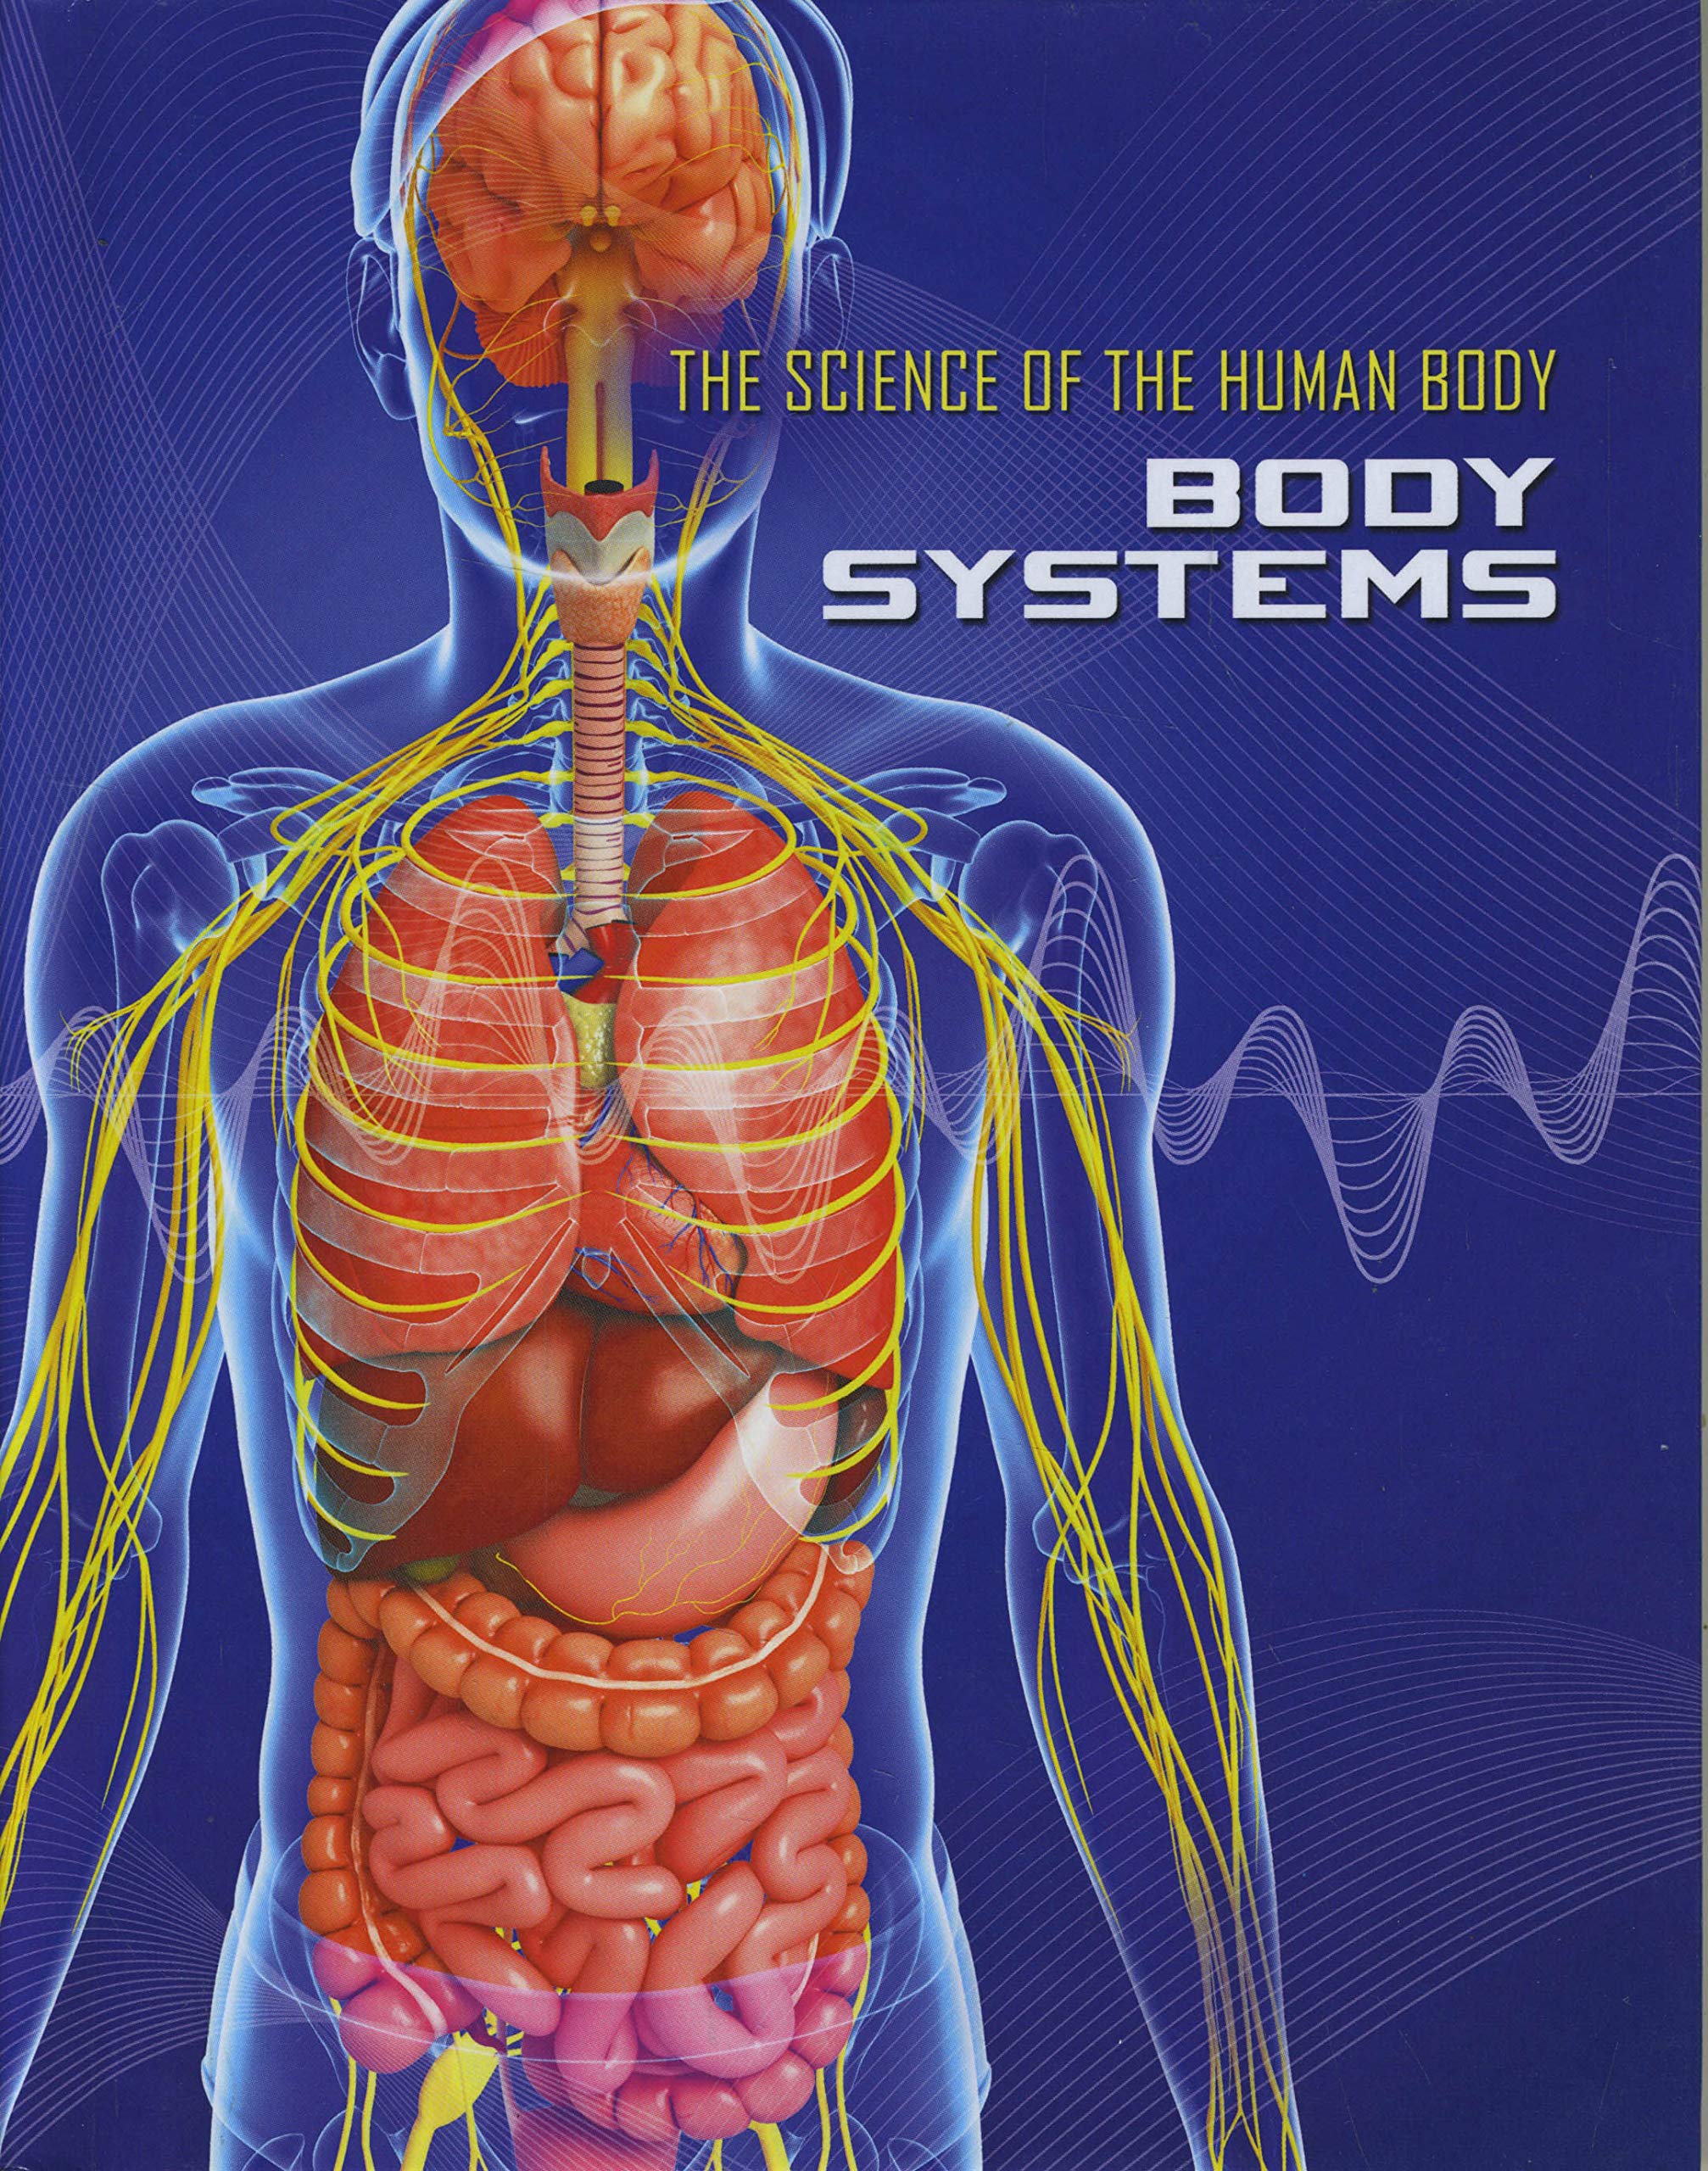 Anatomical Pictures Of Human Body Map Of Human Organs Anatomy